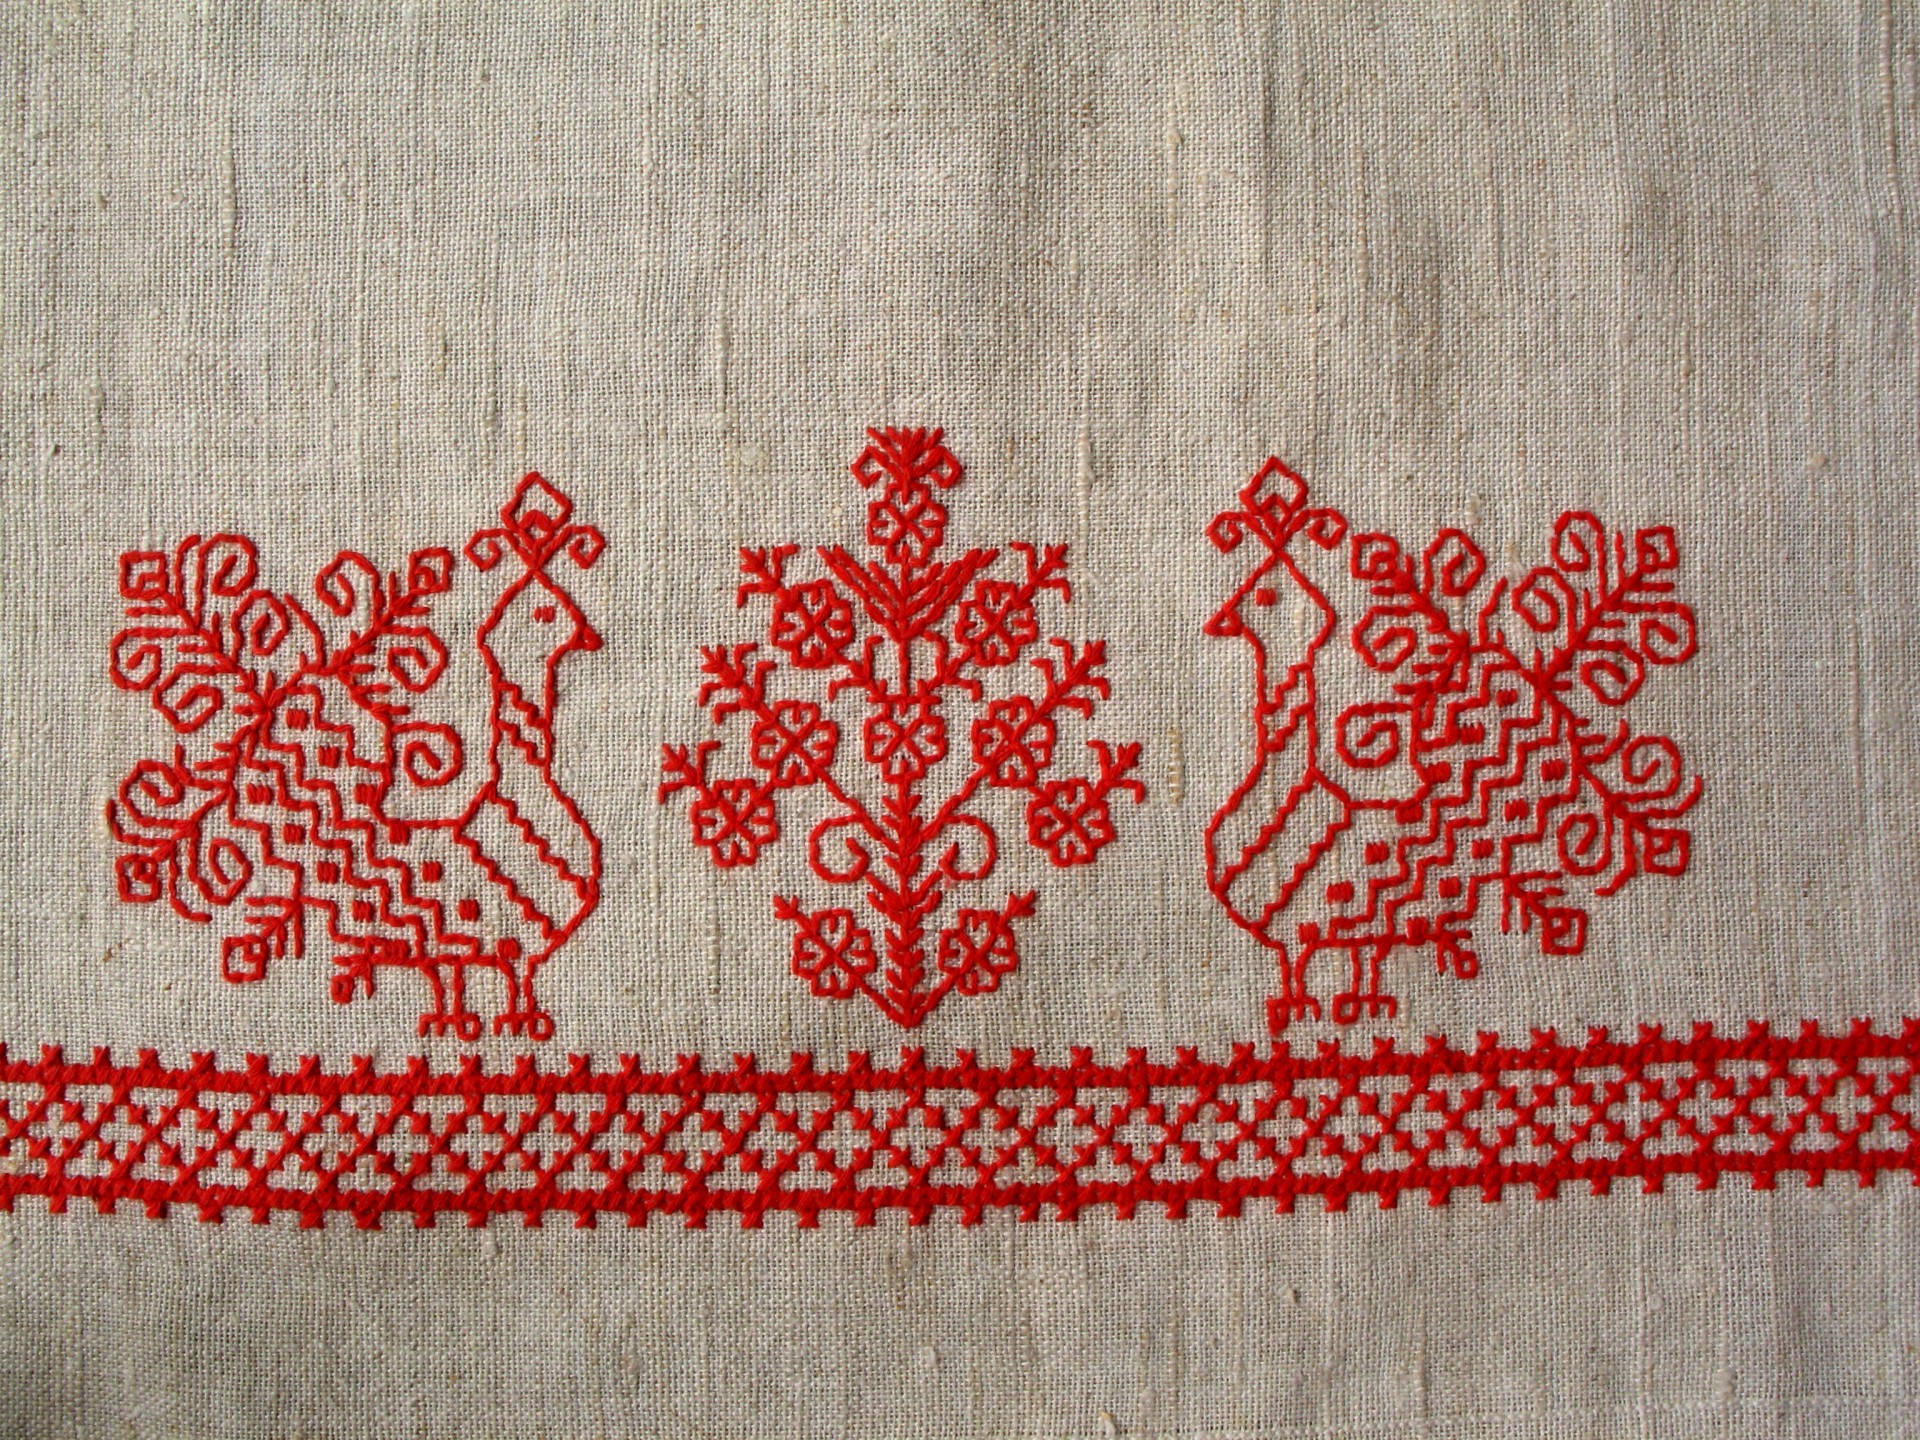 Artists Map Russia's Regions in Folk Embroidery - The Moscow Times